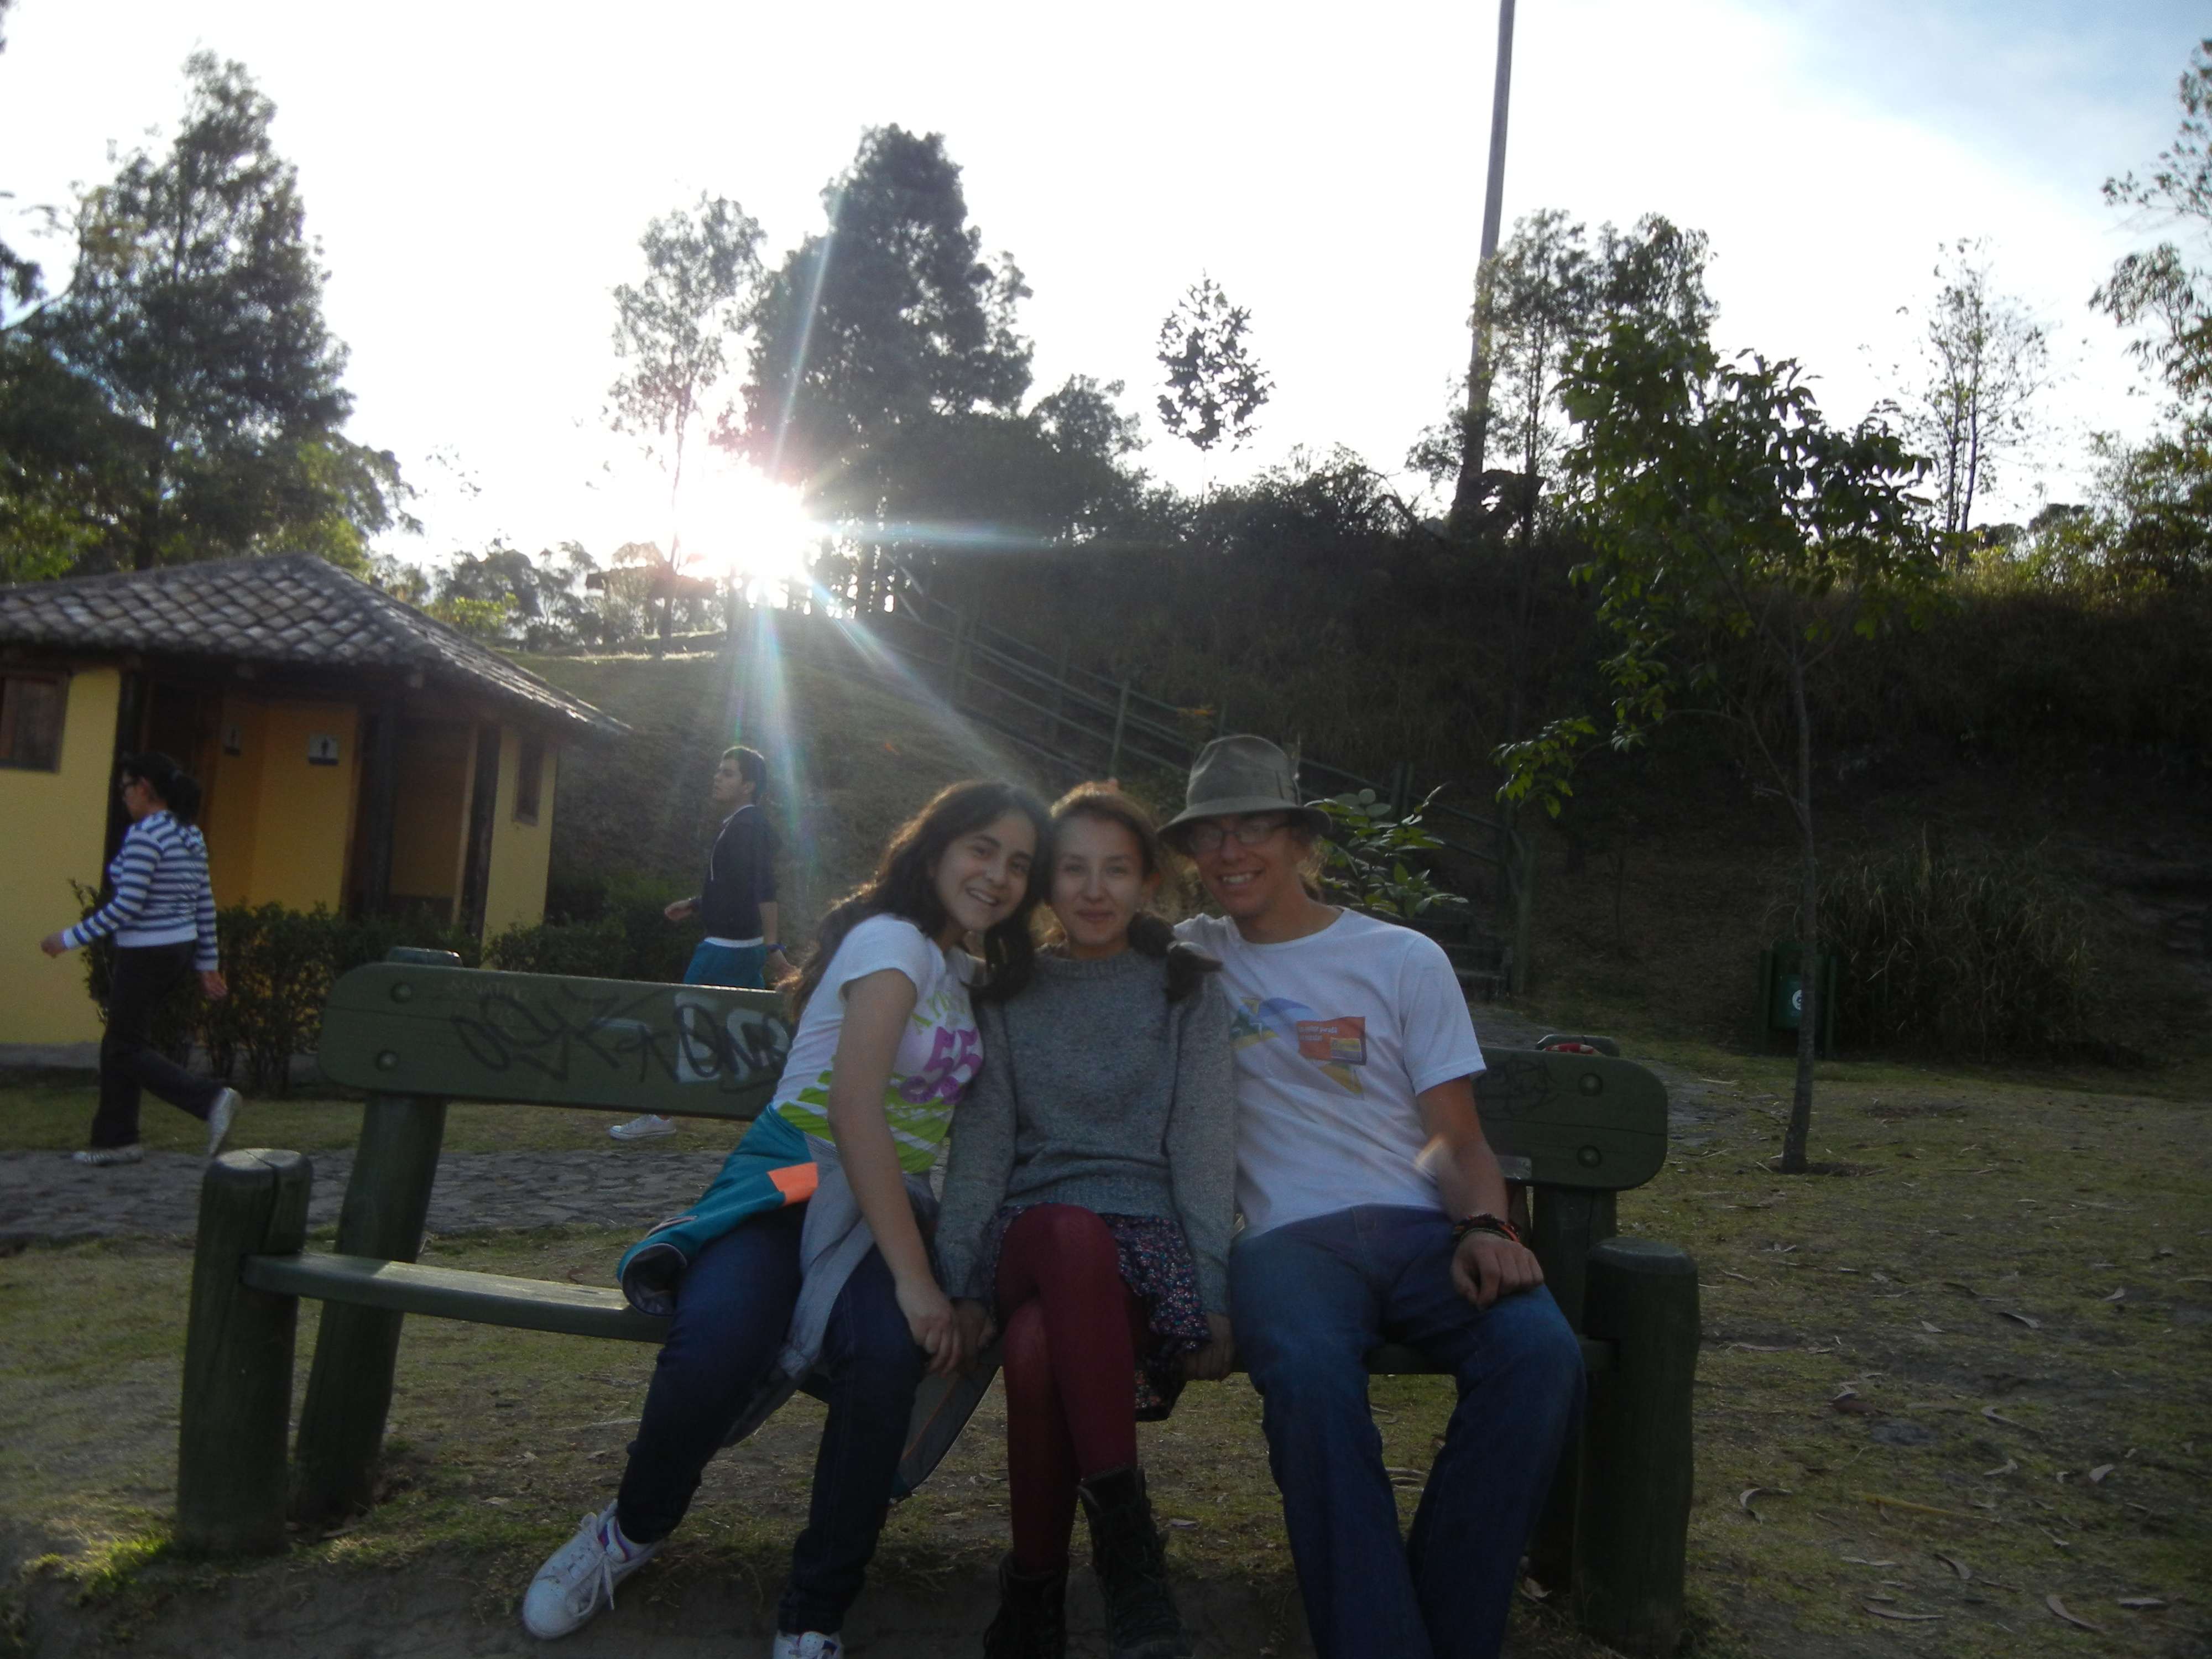 The three of us on a bench